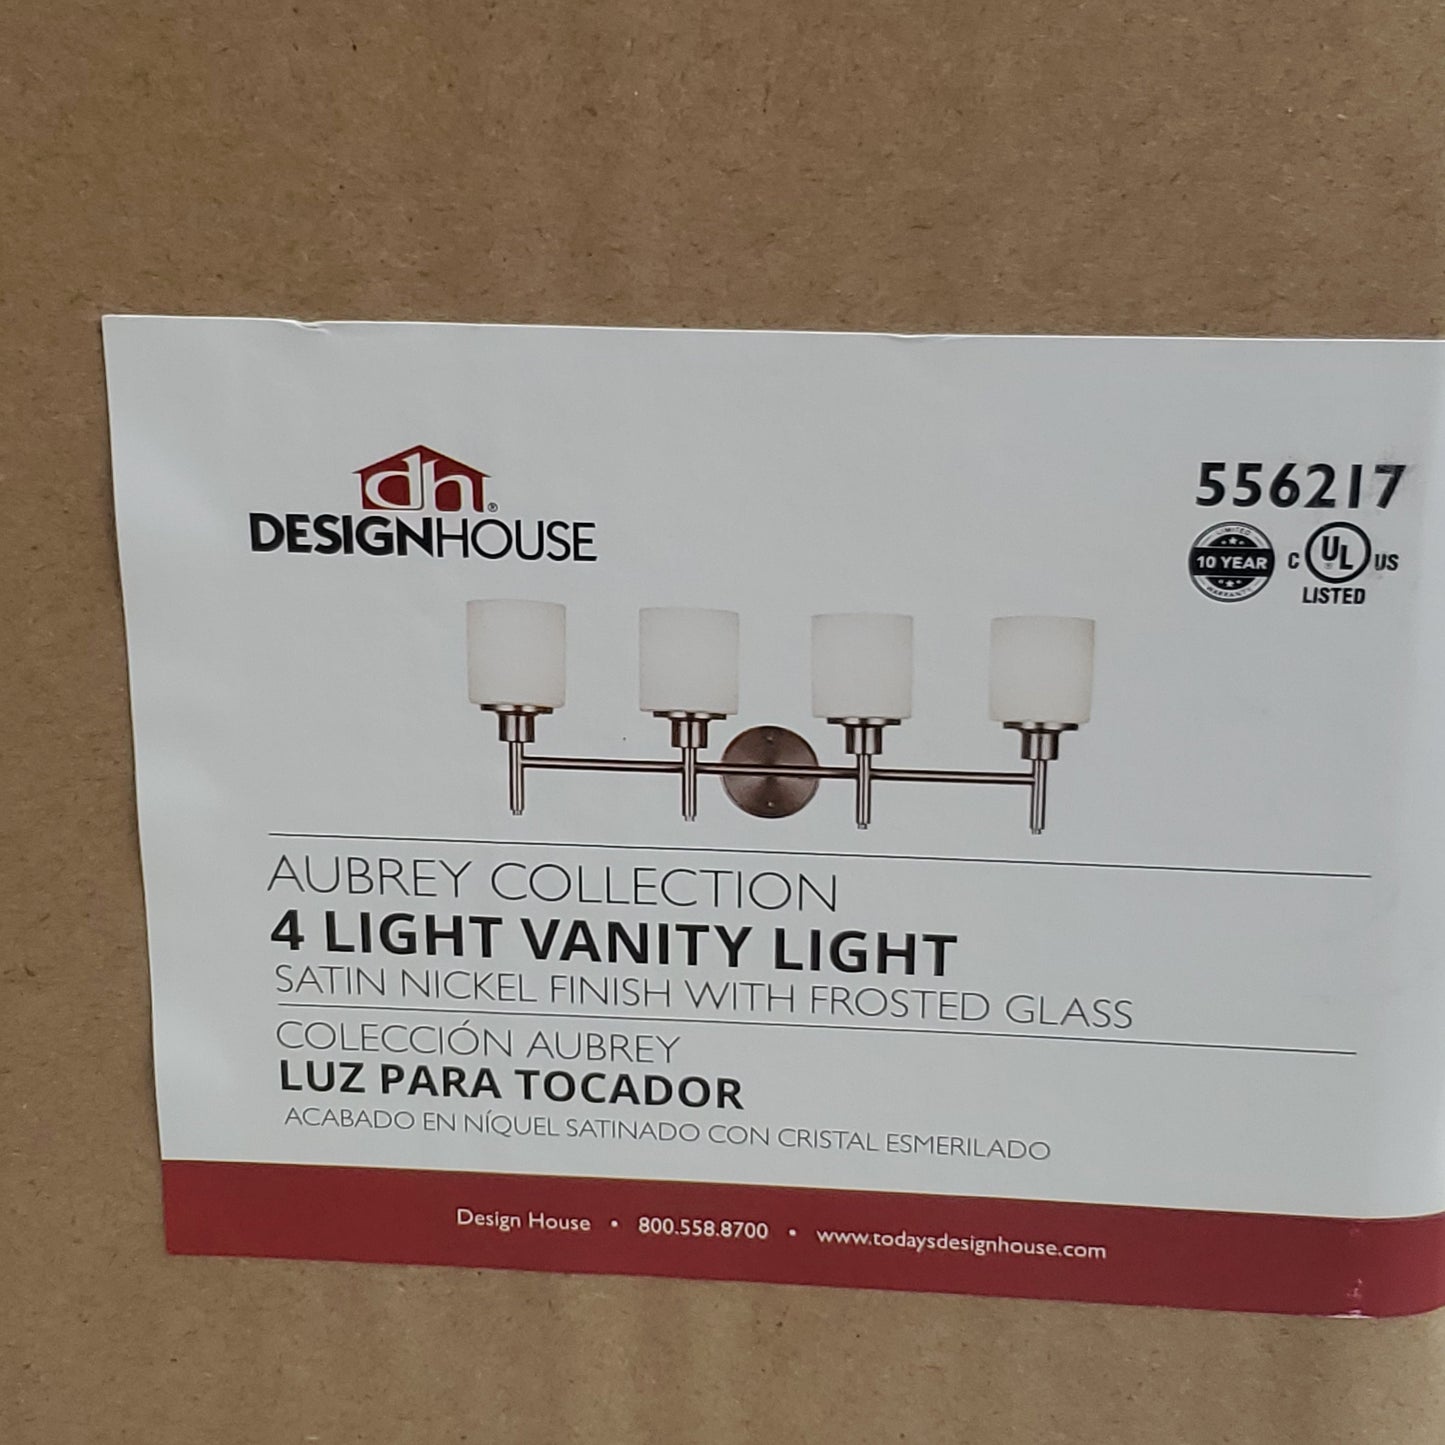 ZA@ DESIGNHOUSE Aubrey Collection 4 Light Vanity Fixture Satin Nickel Finish Frosted Glass 556217 (New) D